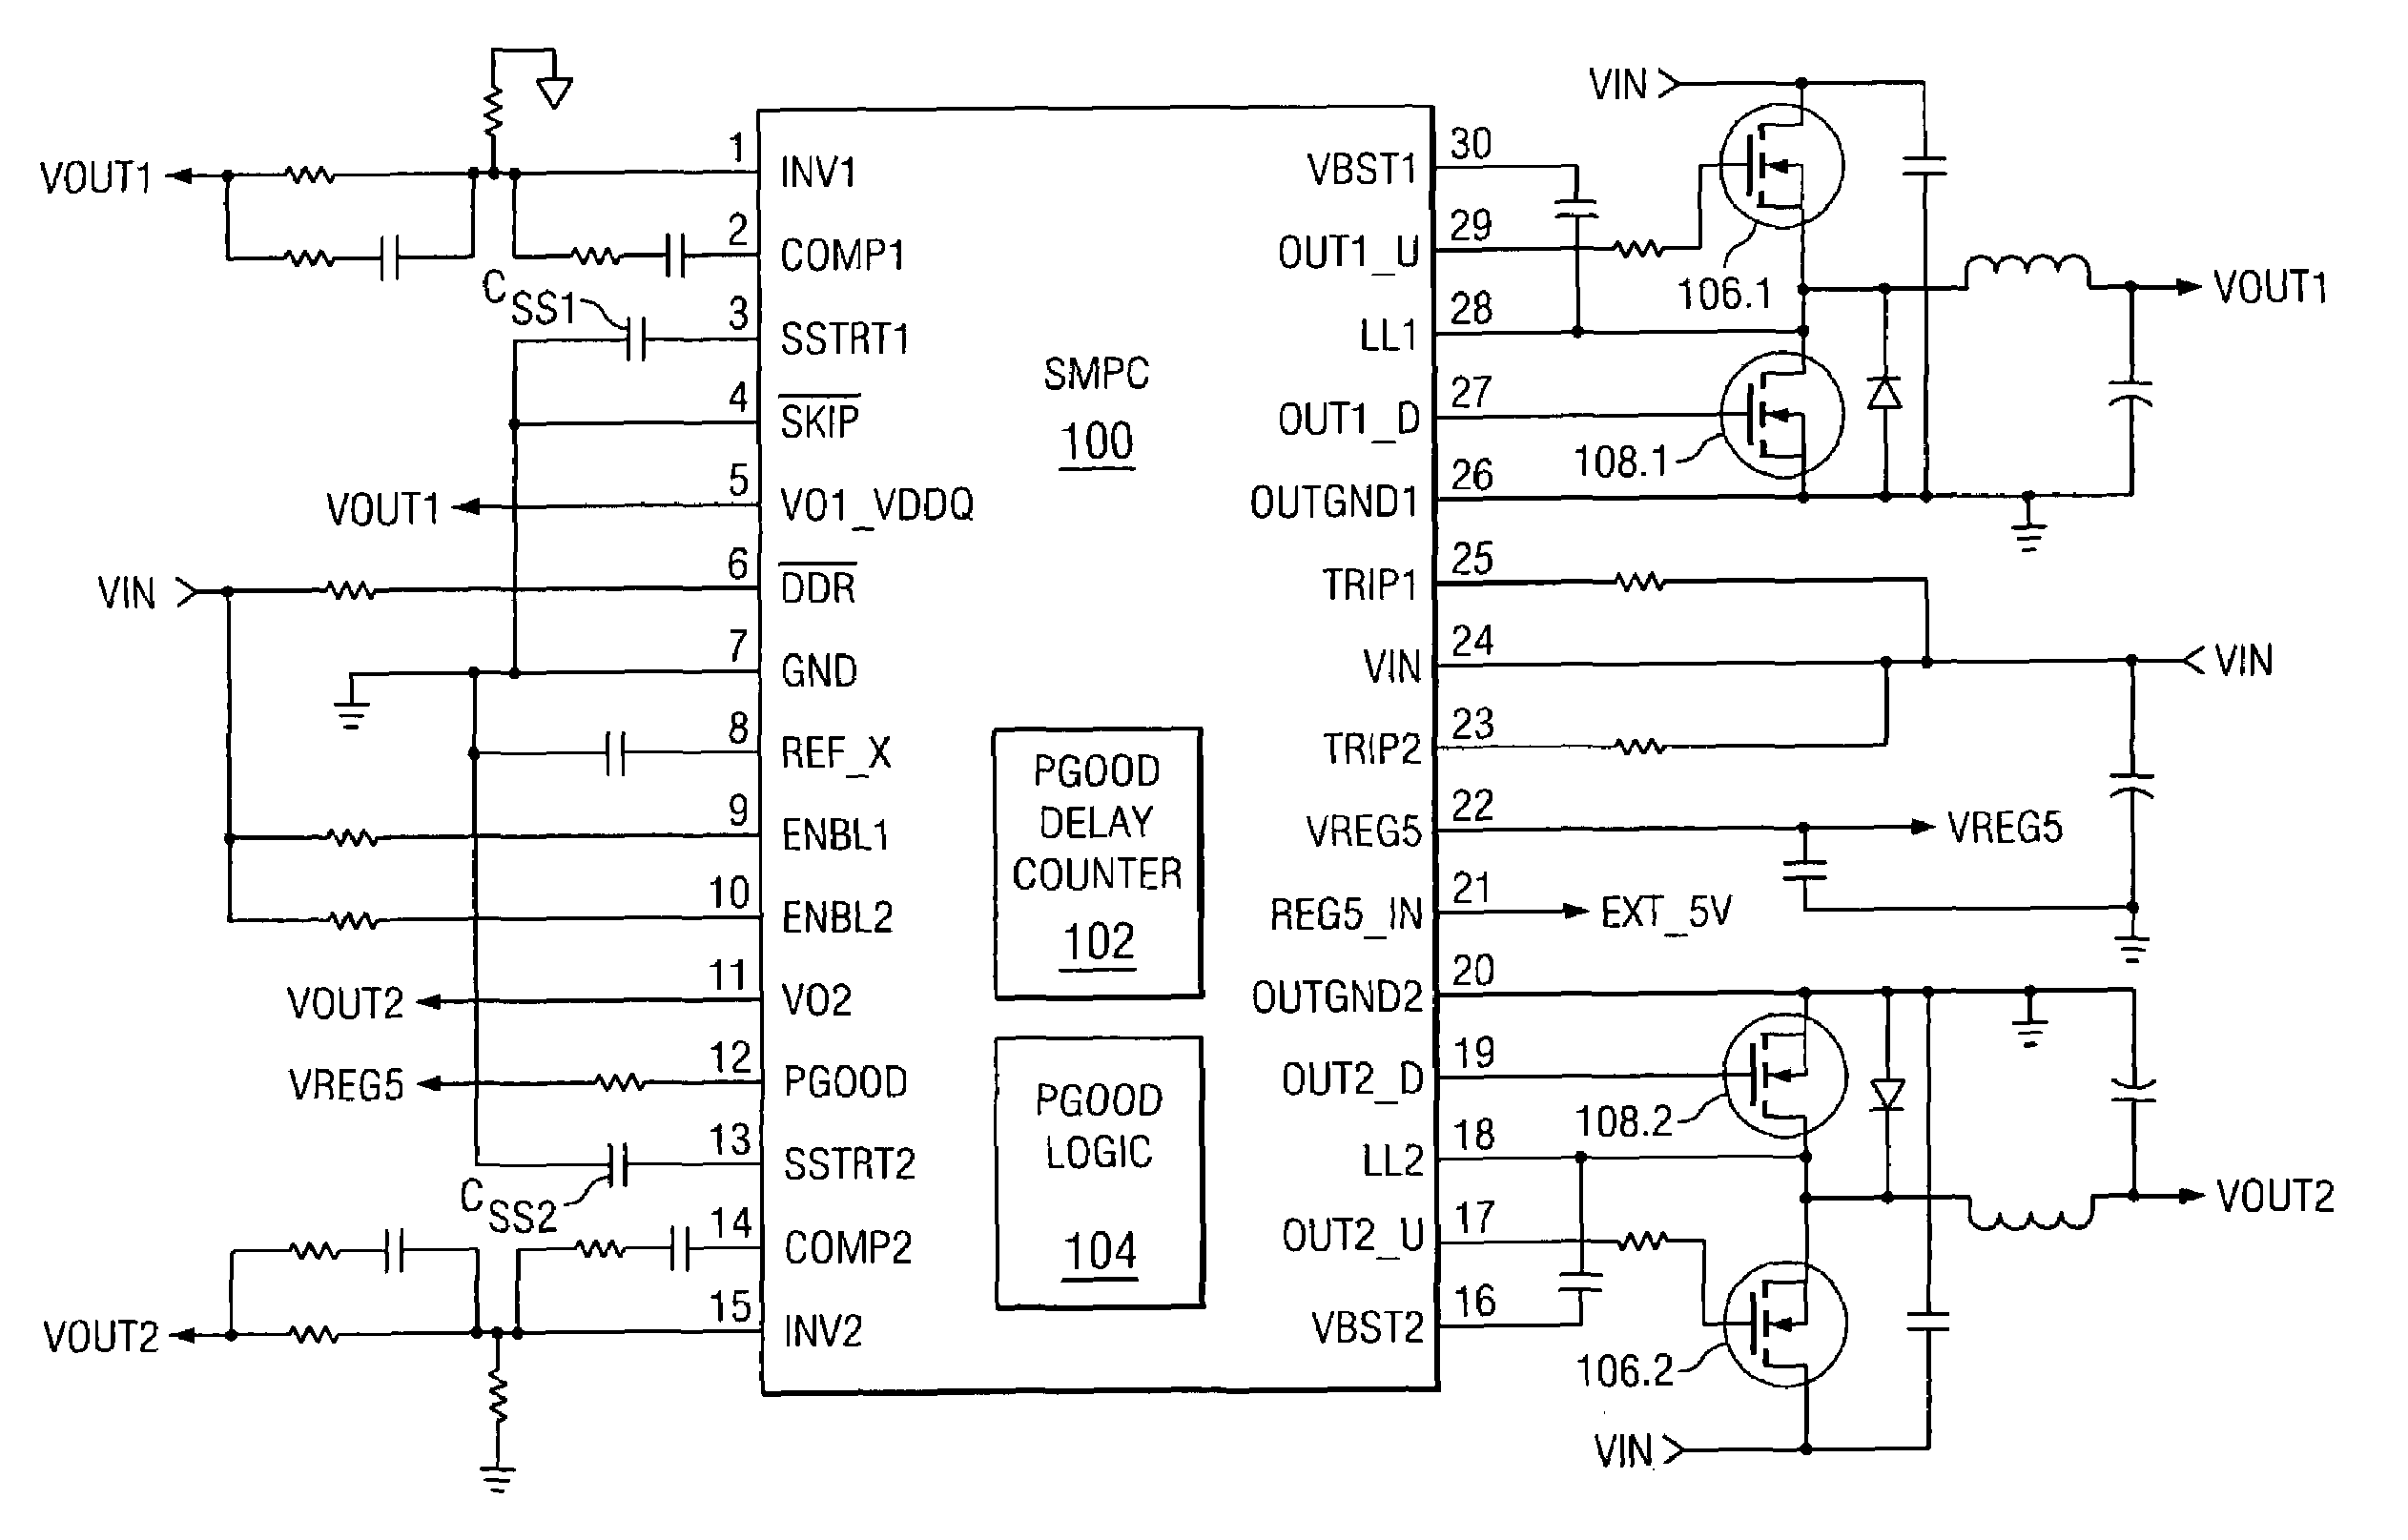 Advanced monitoring algorithm for regulated power systems with single output flag